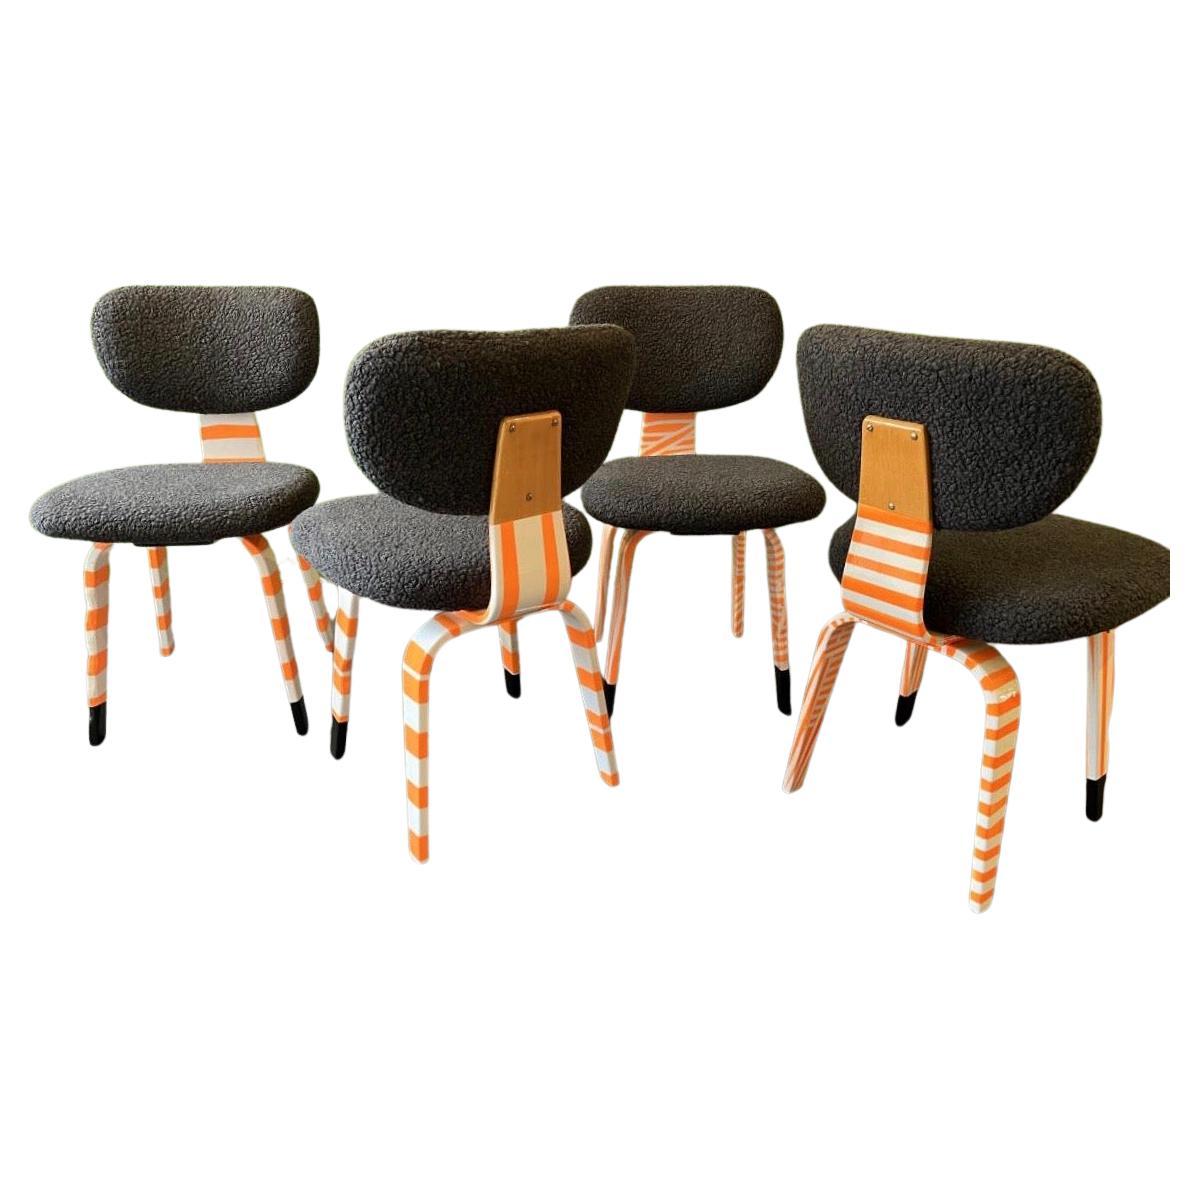 Cees Braakman Dining Chairs contemporized by Markus Friedrich Staab For Sale